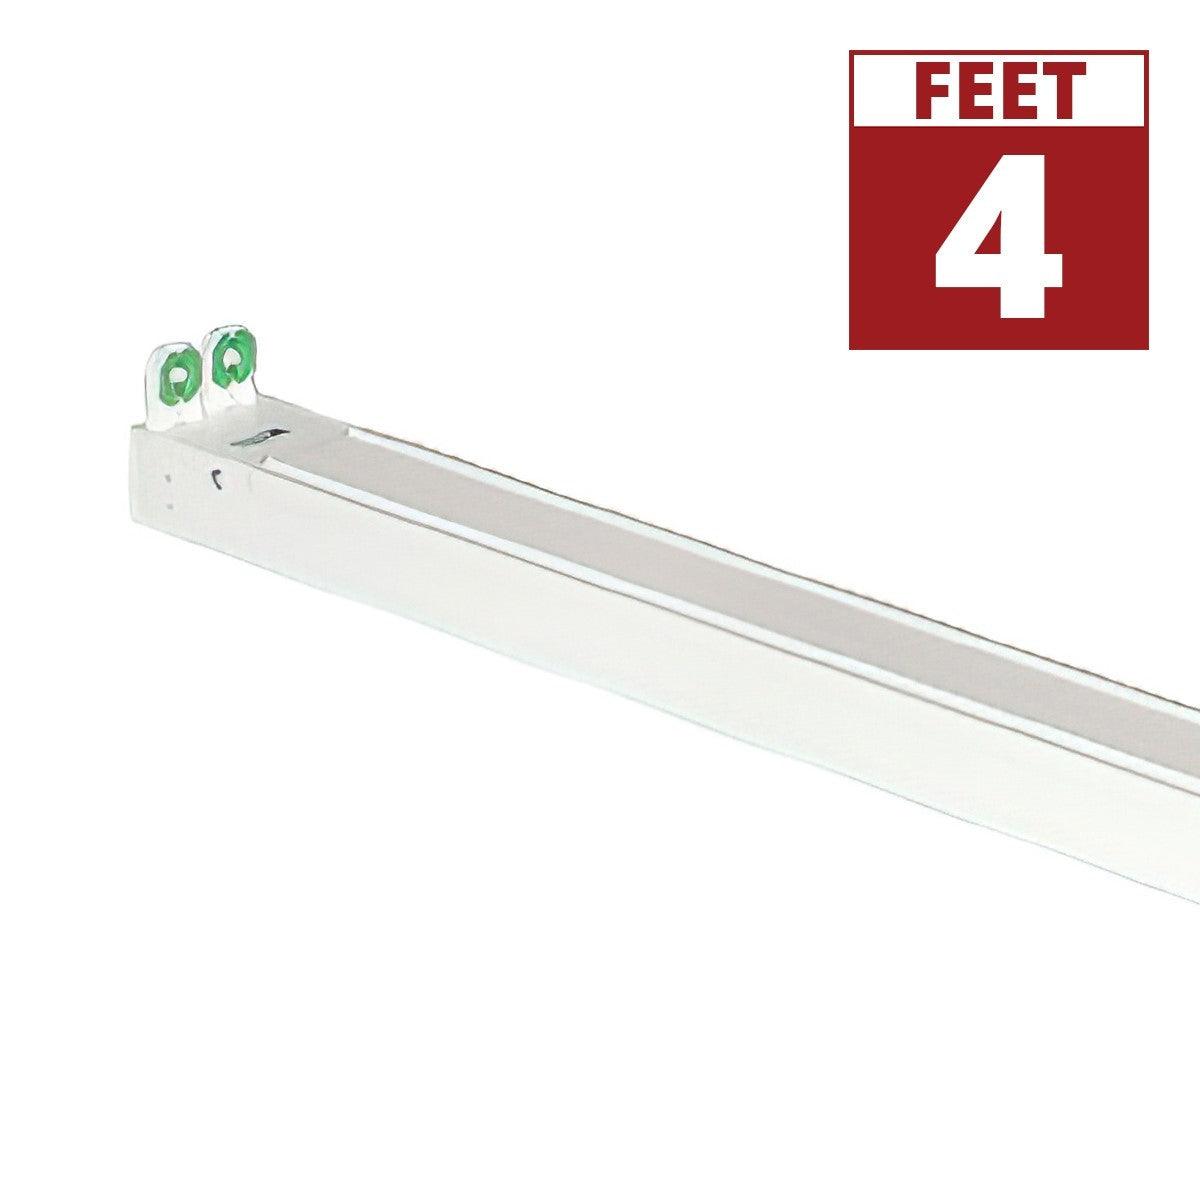 4ft LED Ready Strip Light 2-lamp Double End Wiring LED T8 Bulbs Not Included - Bees Lighting